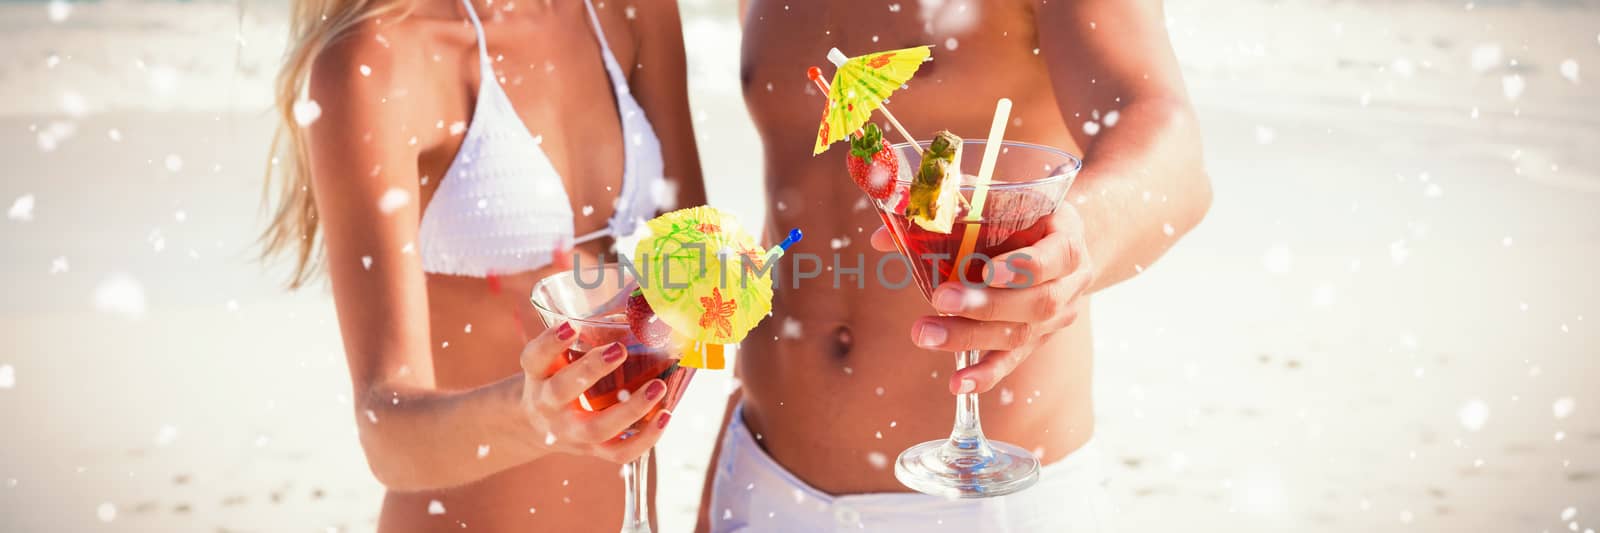 Snow falling against attractive young couple smiling at camera holding cocktails